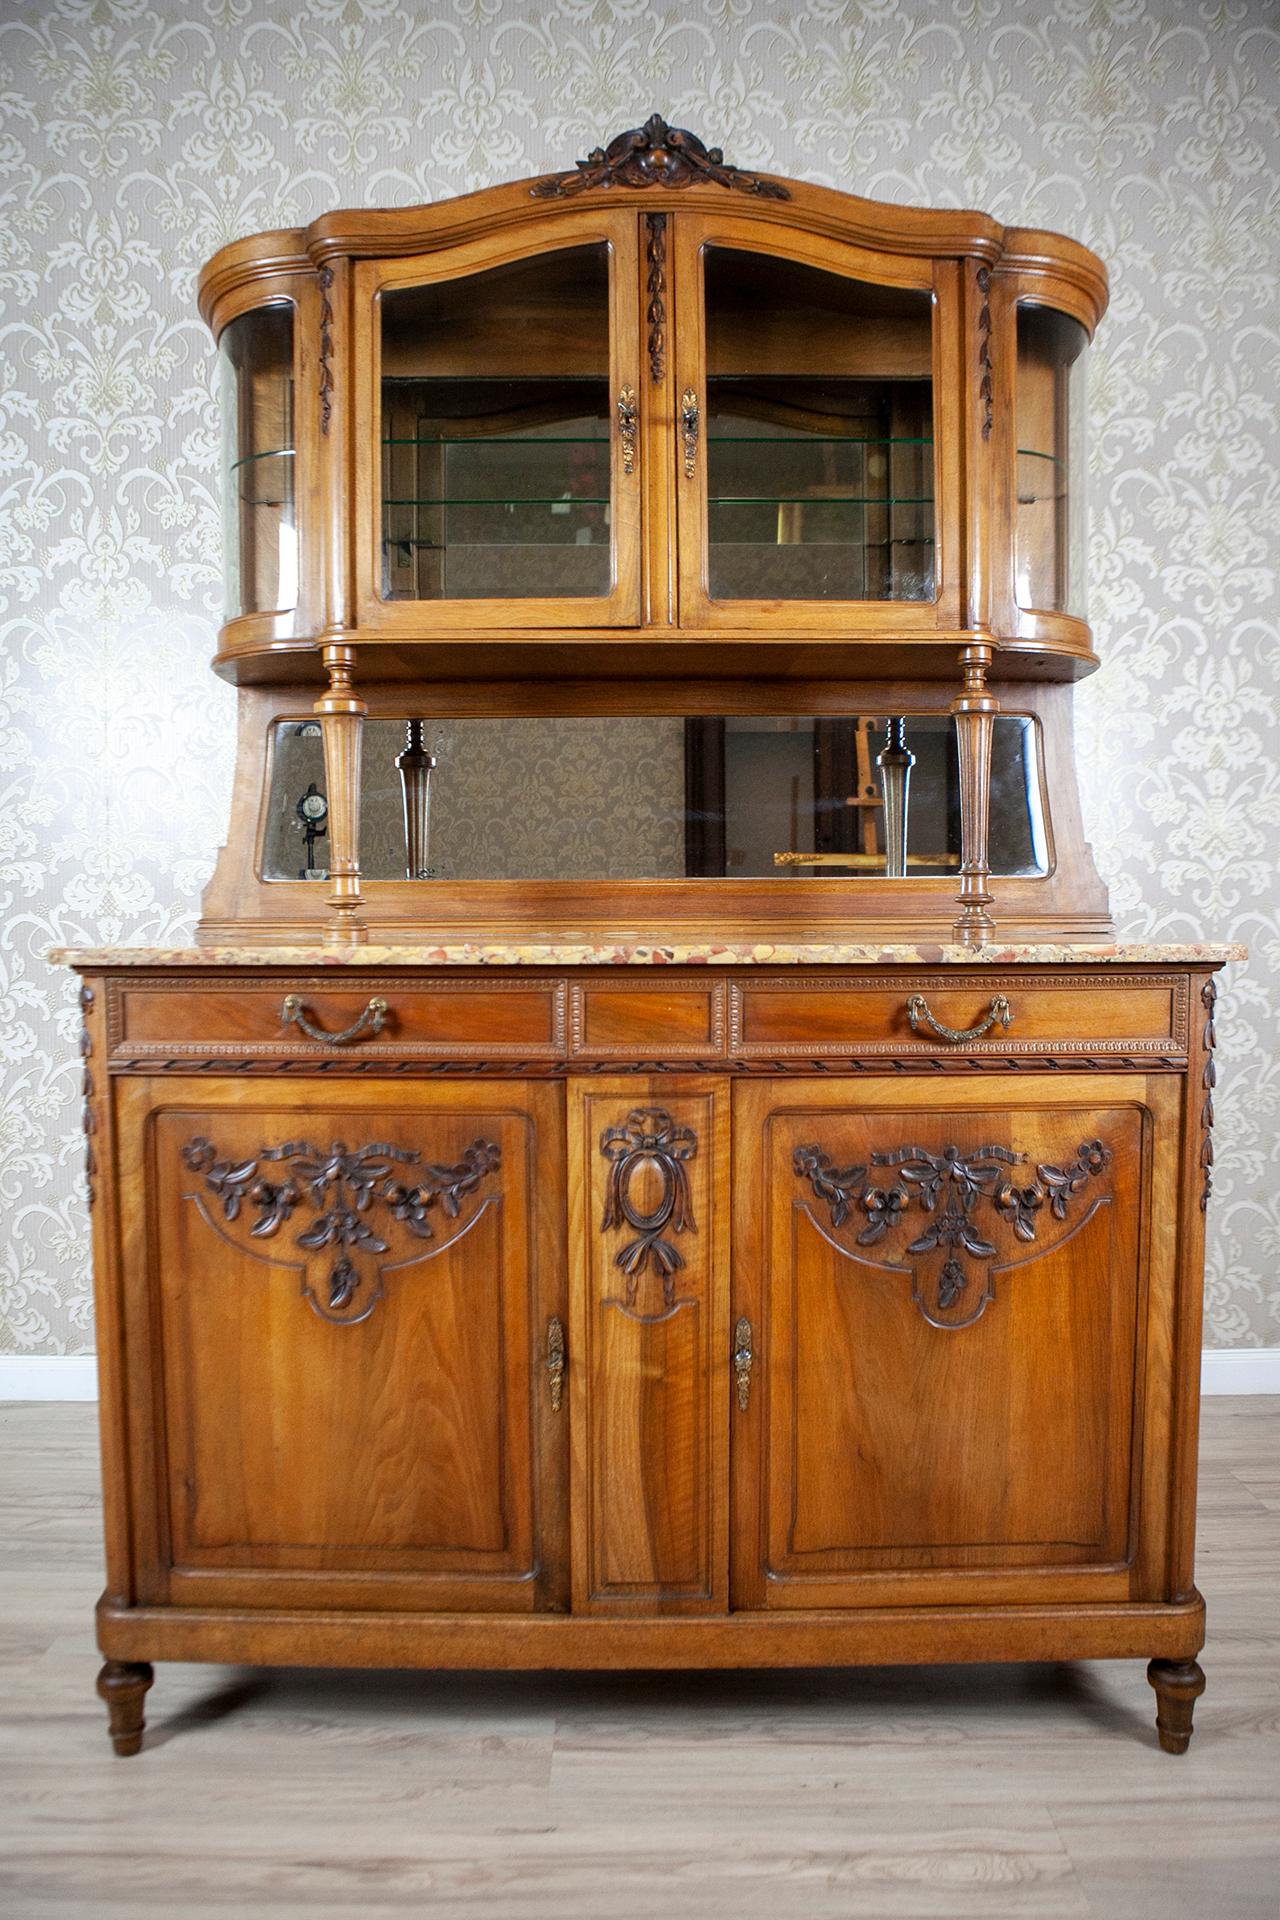 Walnut Buffet from the Interwar Period with Floral Carved Patterns 5